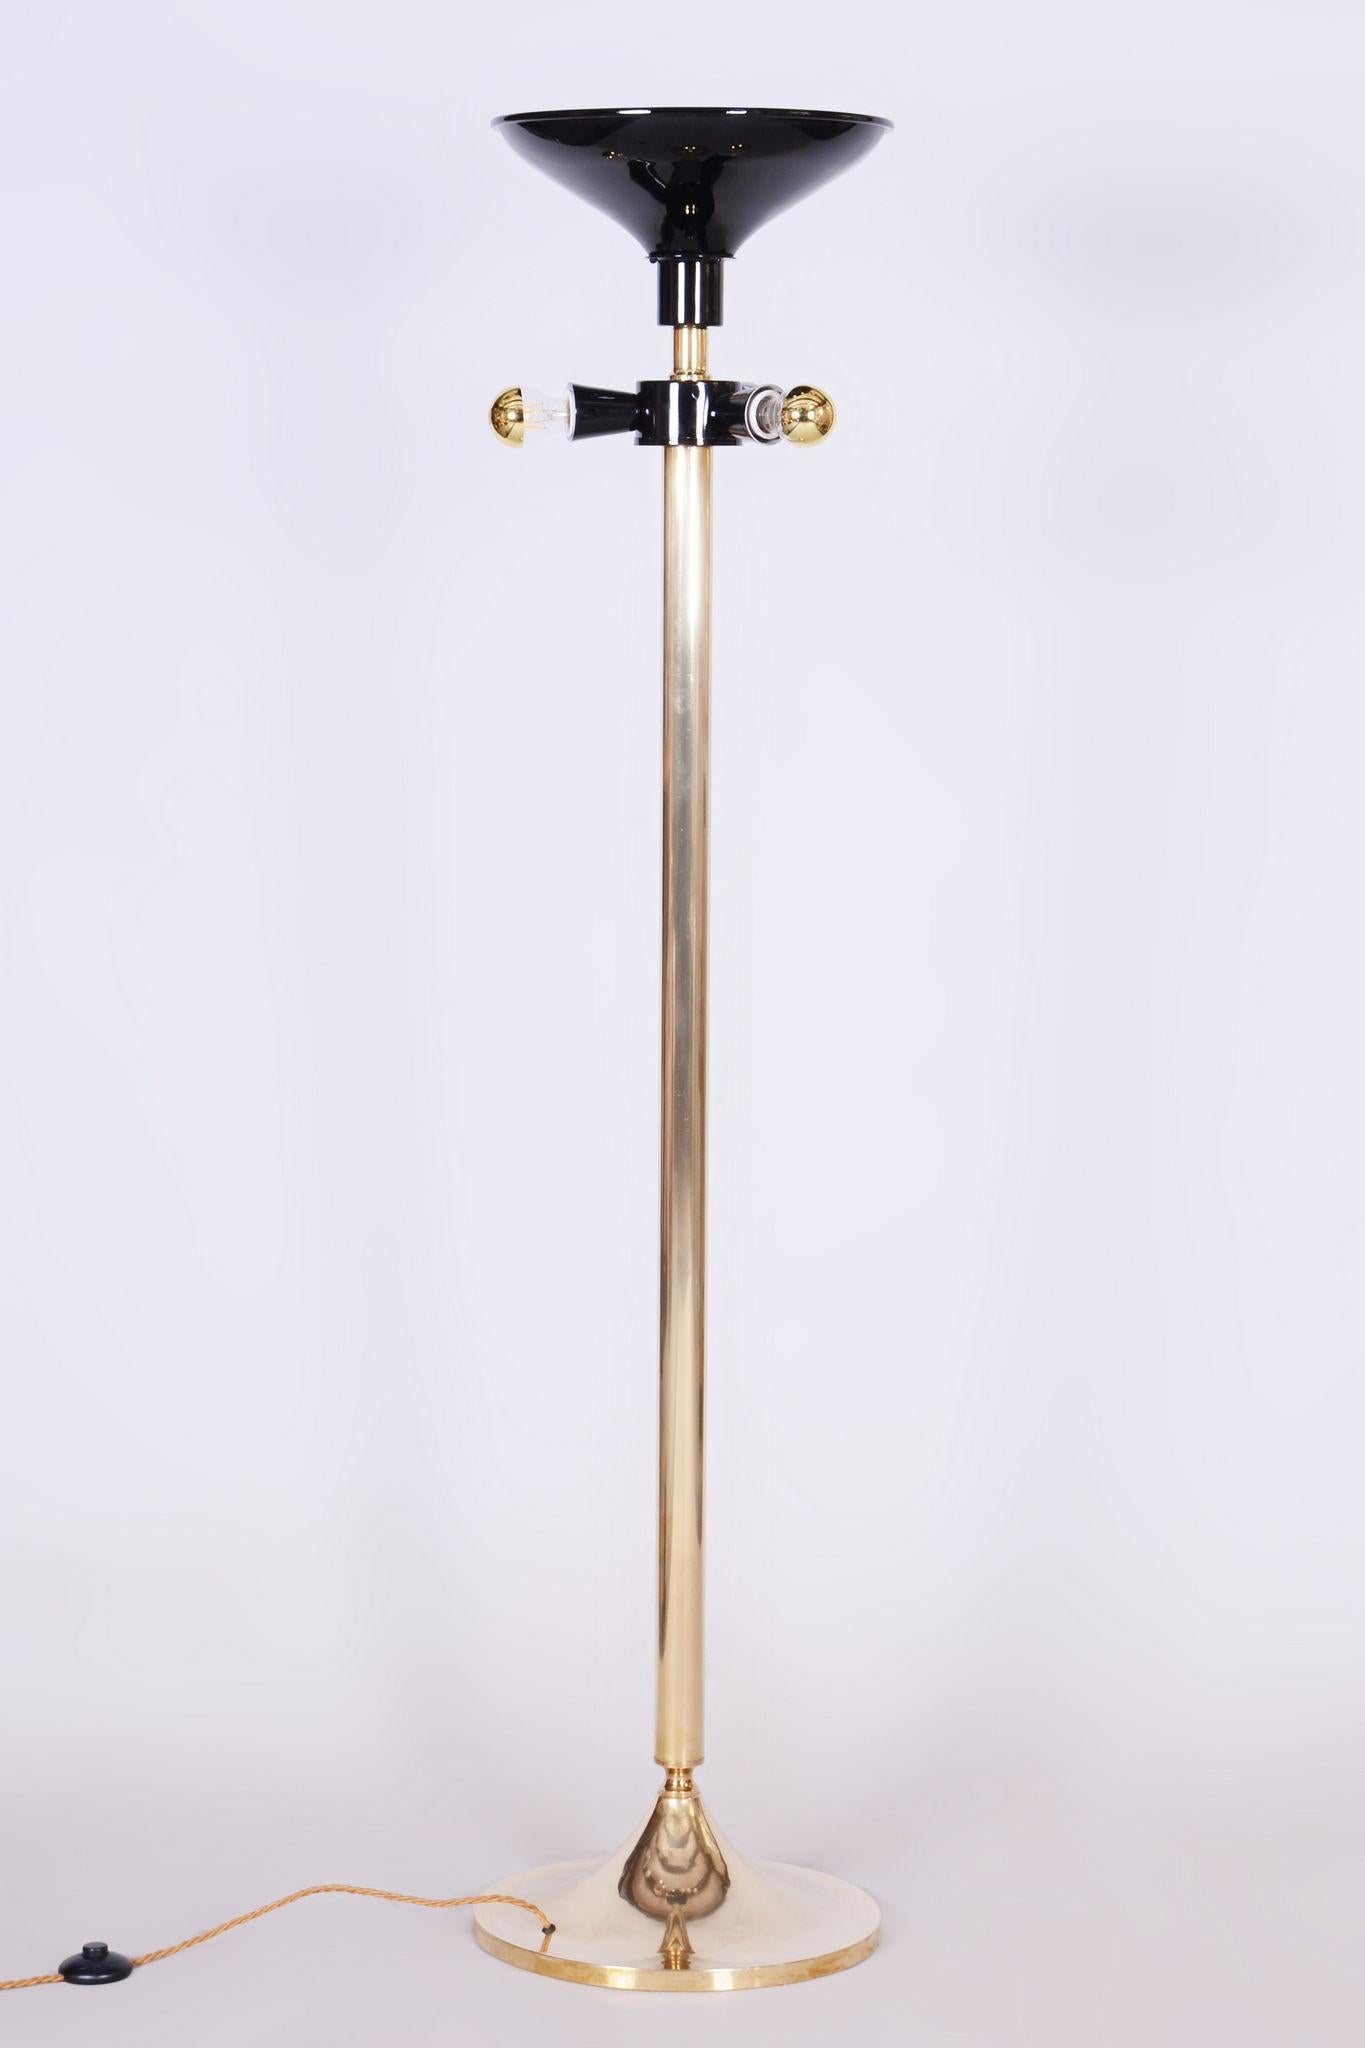 Period: 1960-1969
Source: Czech
Material: Fully cleaned brass

This item features classic Art Deco elements. Art Deco is a style that originated in France in the early 20th century. Its furniture designs are meticulously crafted, usually using